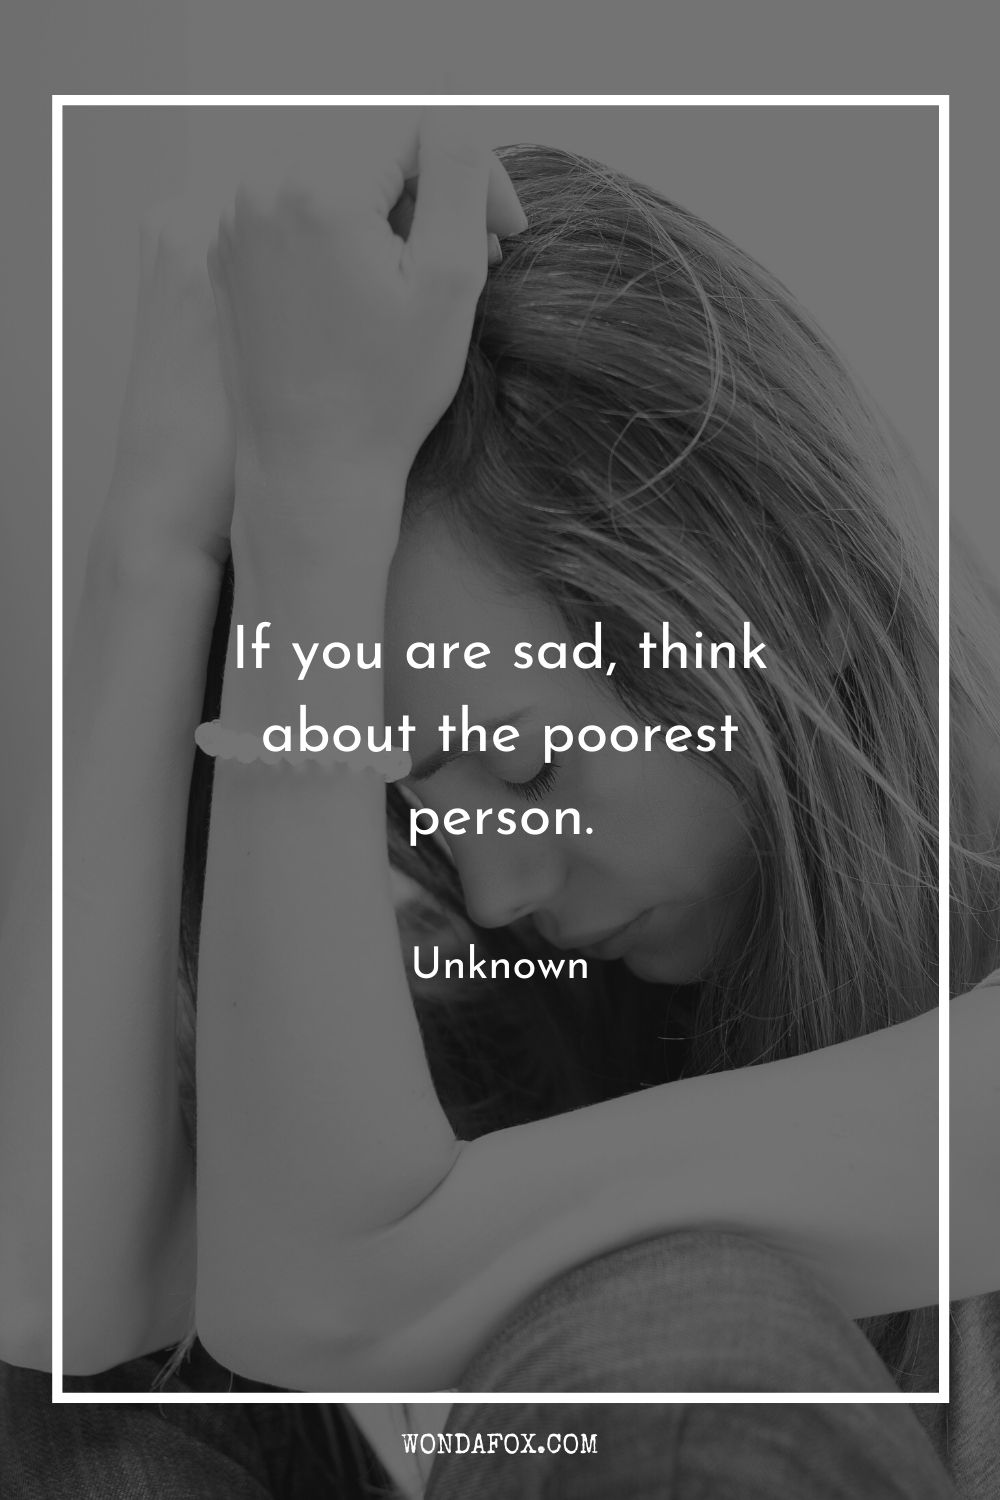 If you are sad, think about the poorest person.